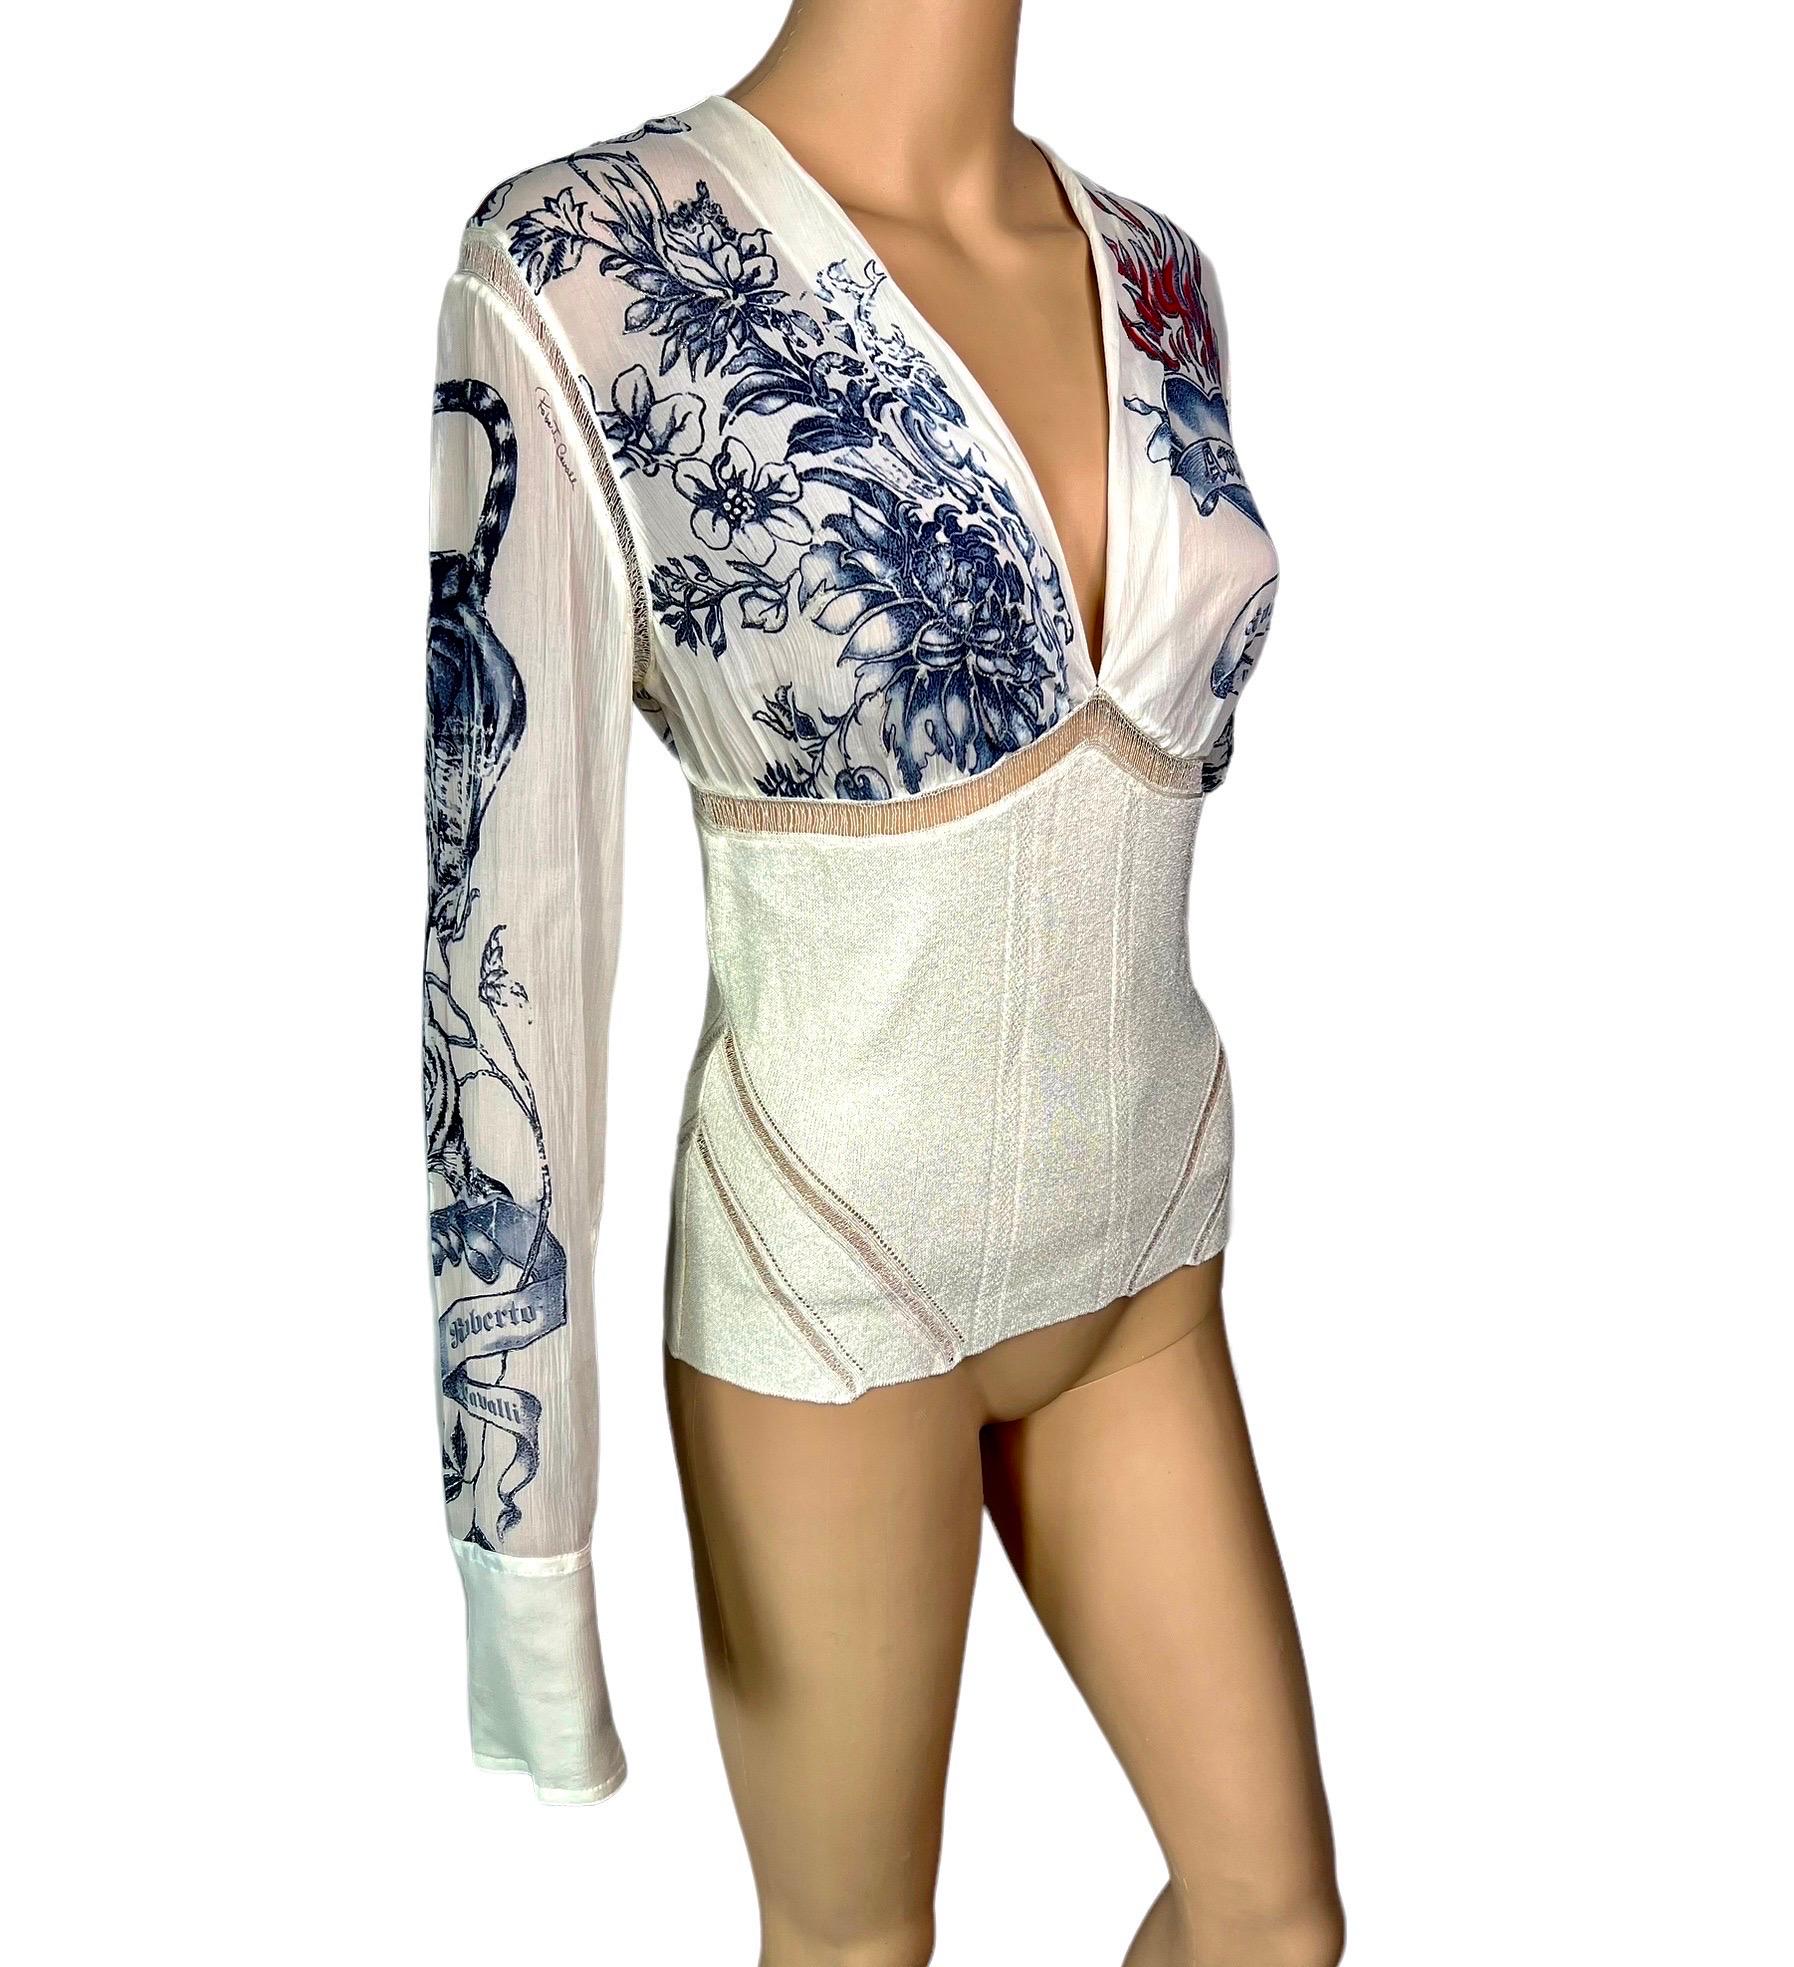 Roberto Cavalli S/S 2003 Tattoo Print Plunging Silk Knit Sheer Panels Blouse Top In Excellent Condition For Sale In Naples, FL